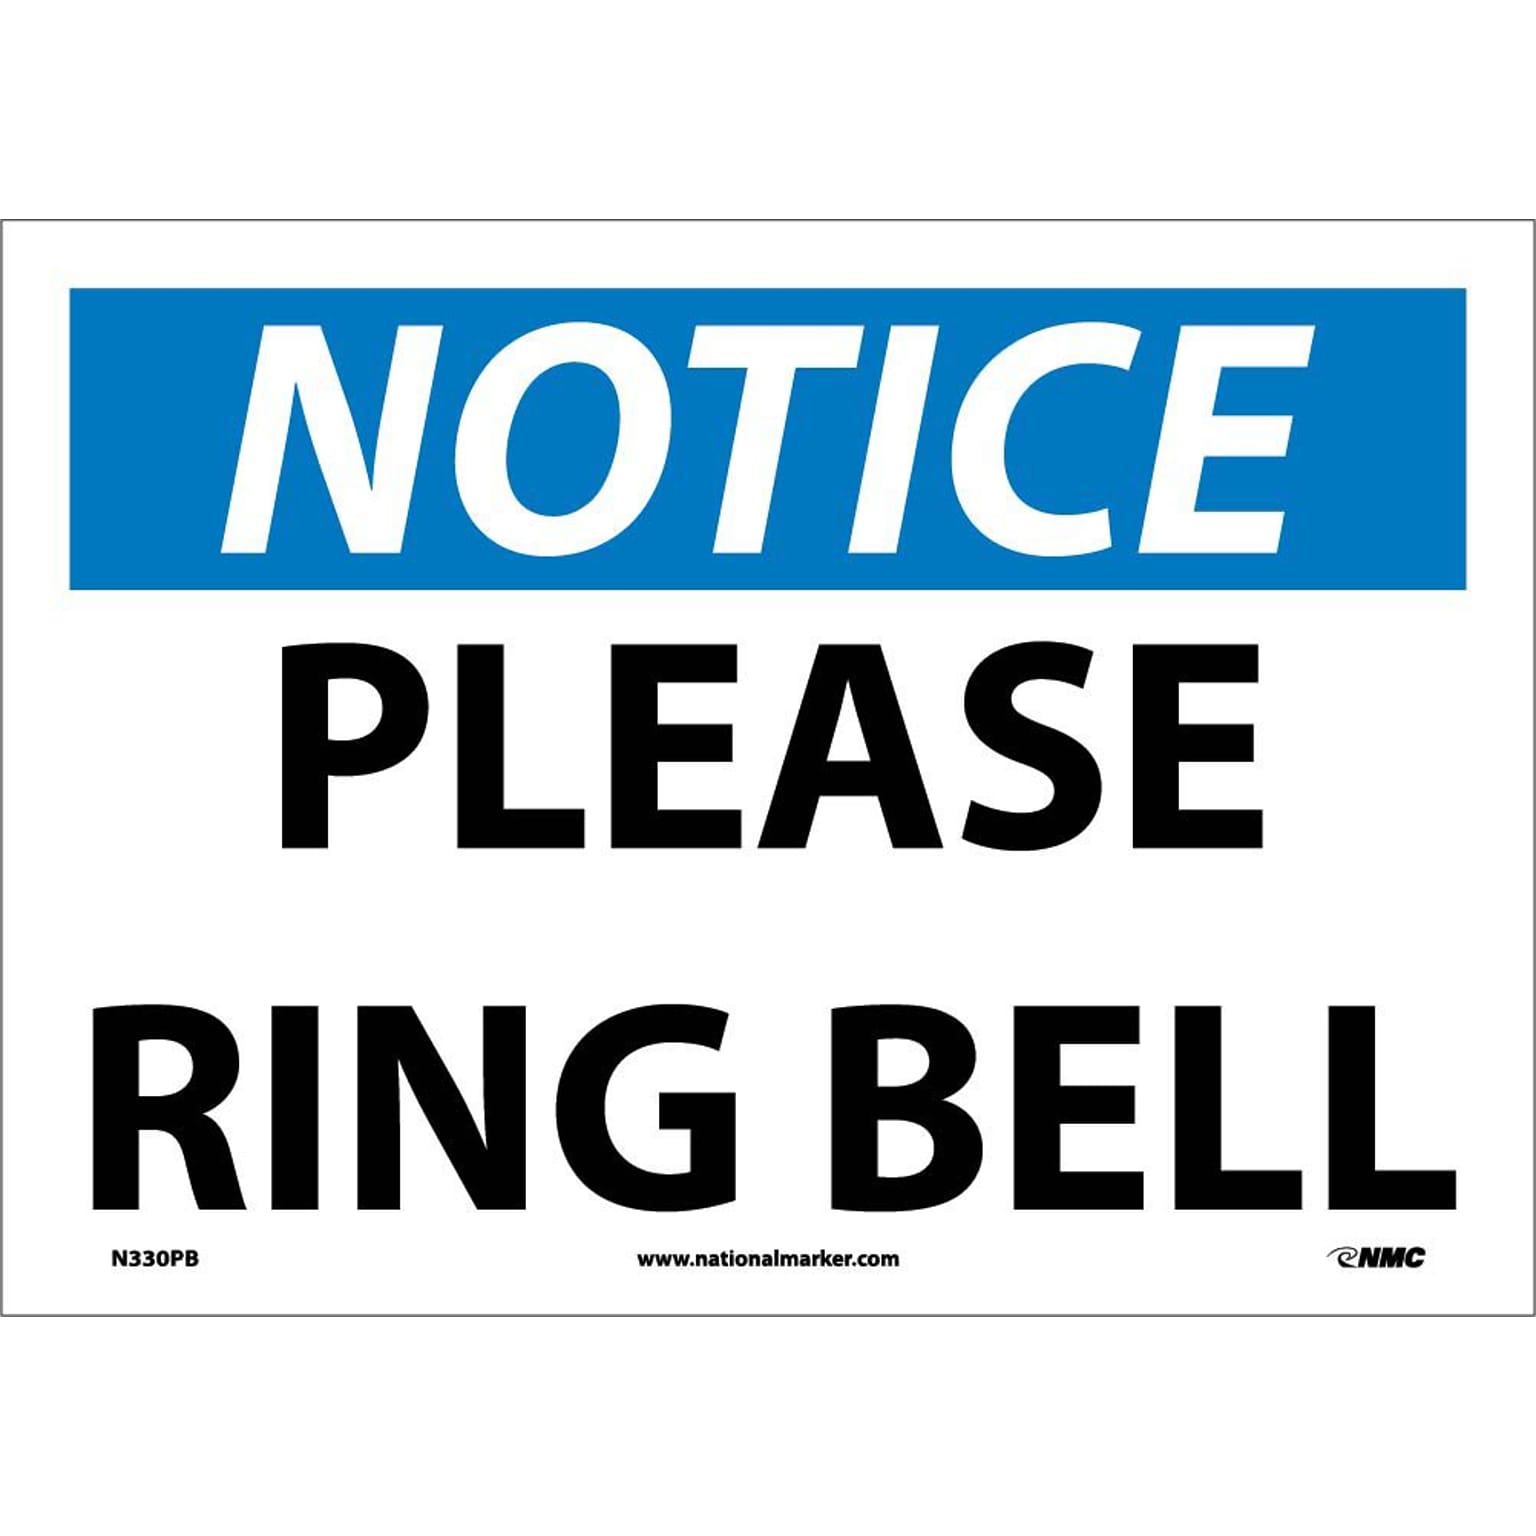 Notice Labels; Please Ring Bell, 10 x 14, Adhesive Vinyl